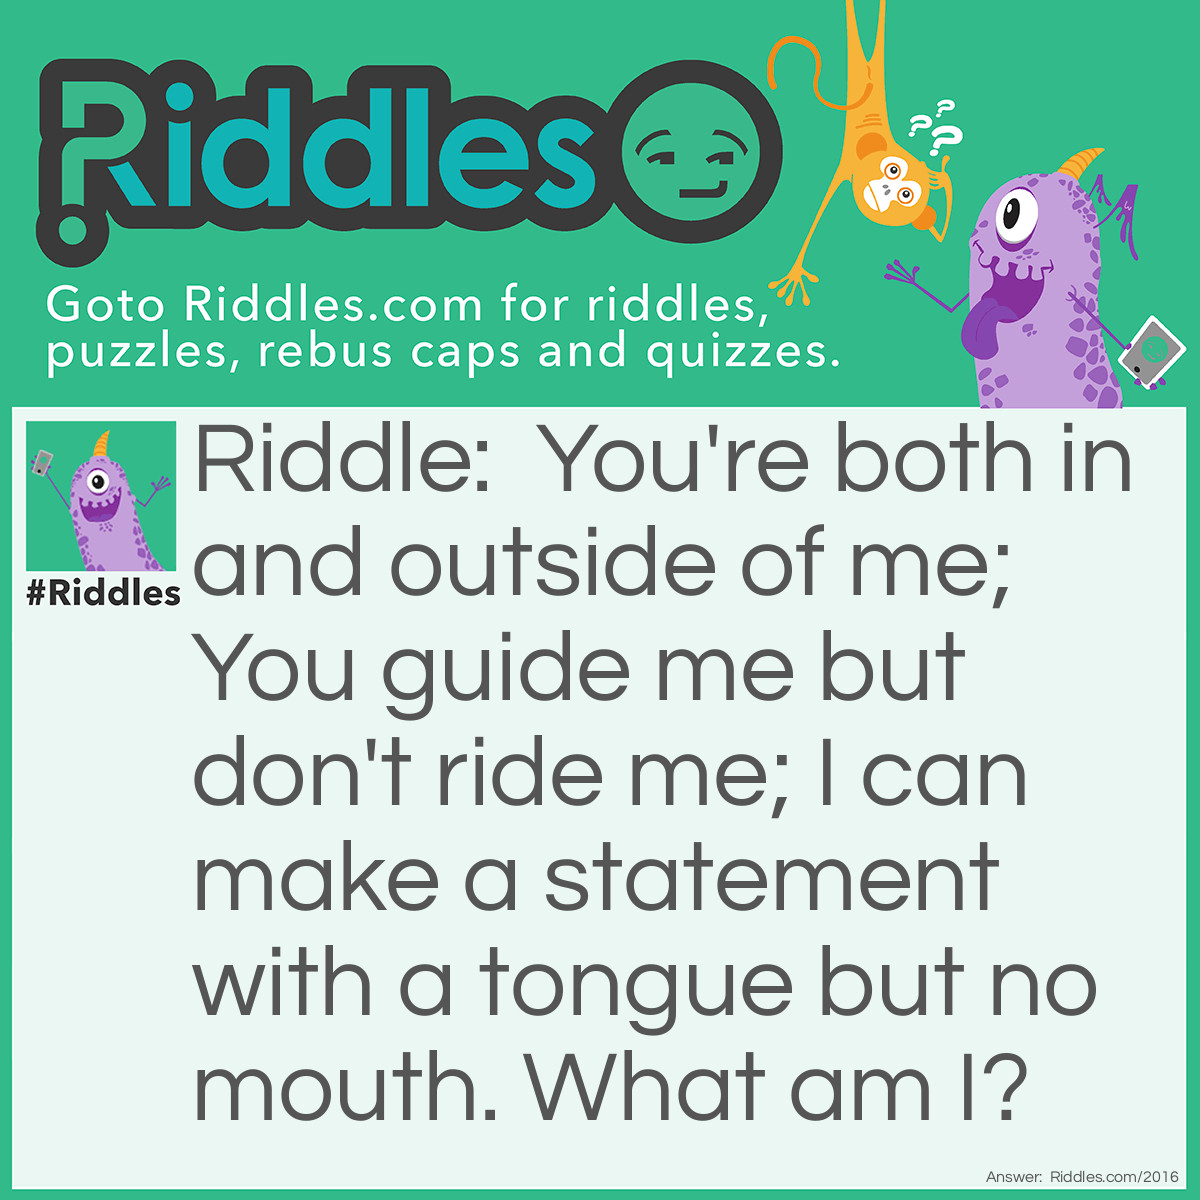 Riddle: You're both in and outside of me; You guide me but don't ride me; I can make a statement with a tongue but no mouth. What am I? Answer: Shoes.